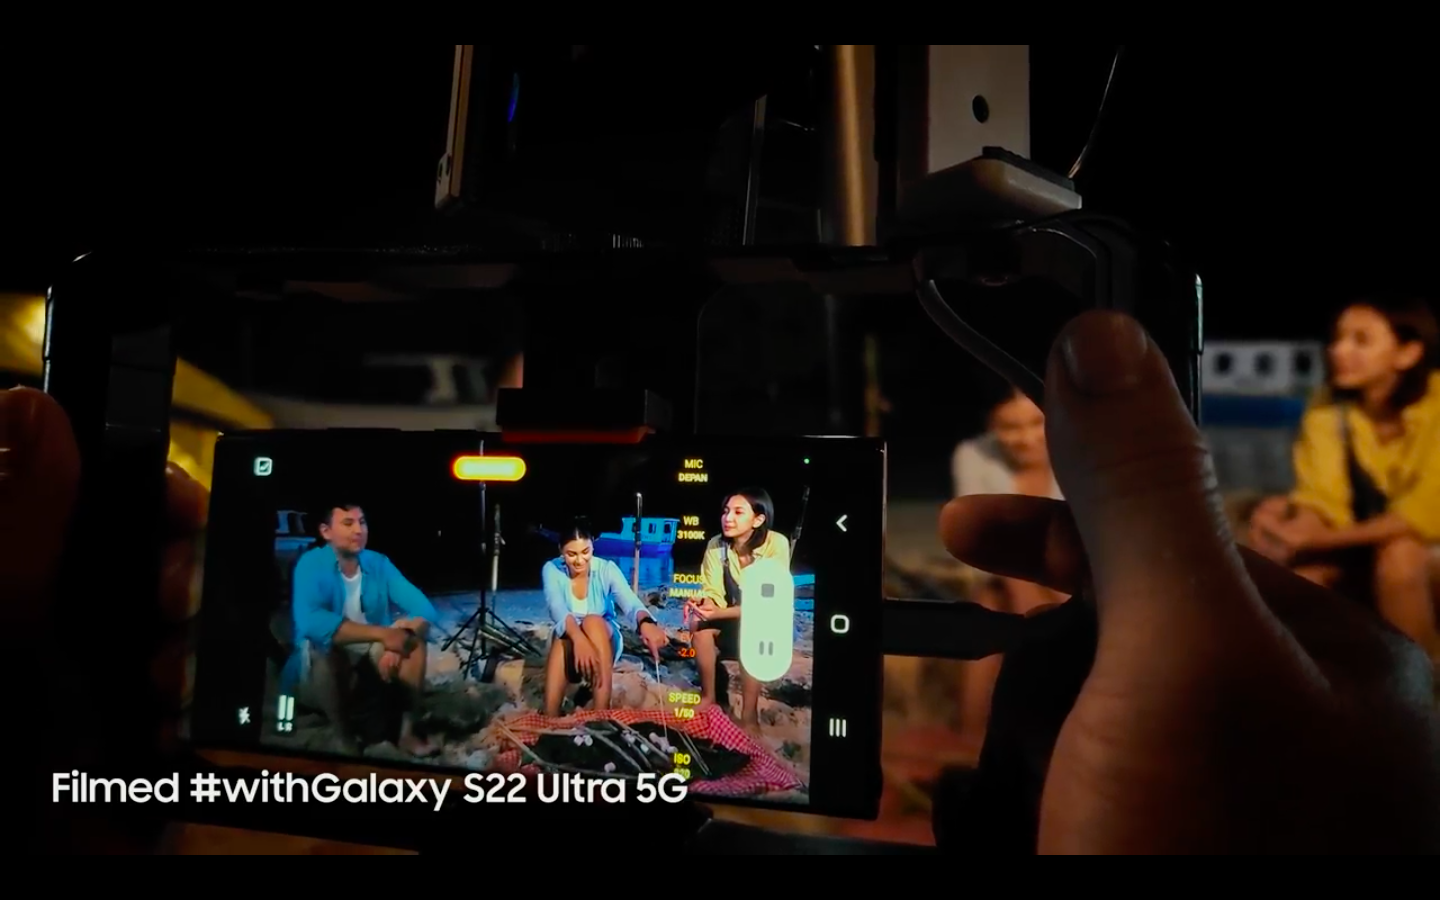 Filmed #withGalaxy S22 Ultra 5G.